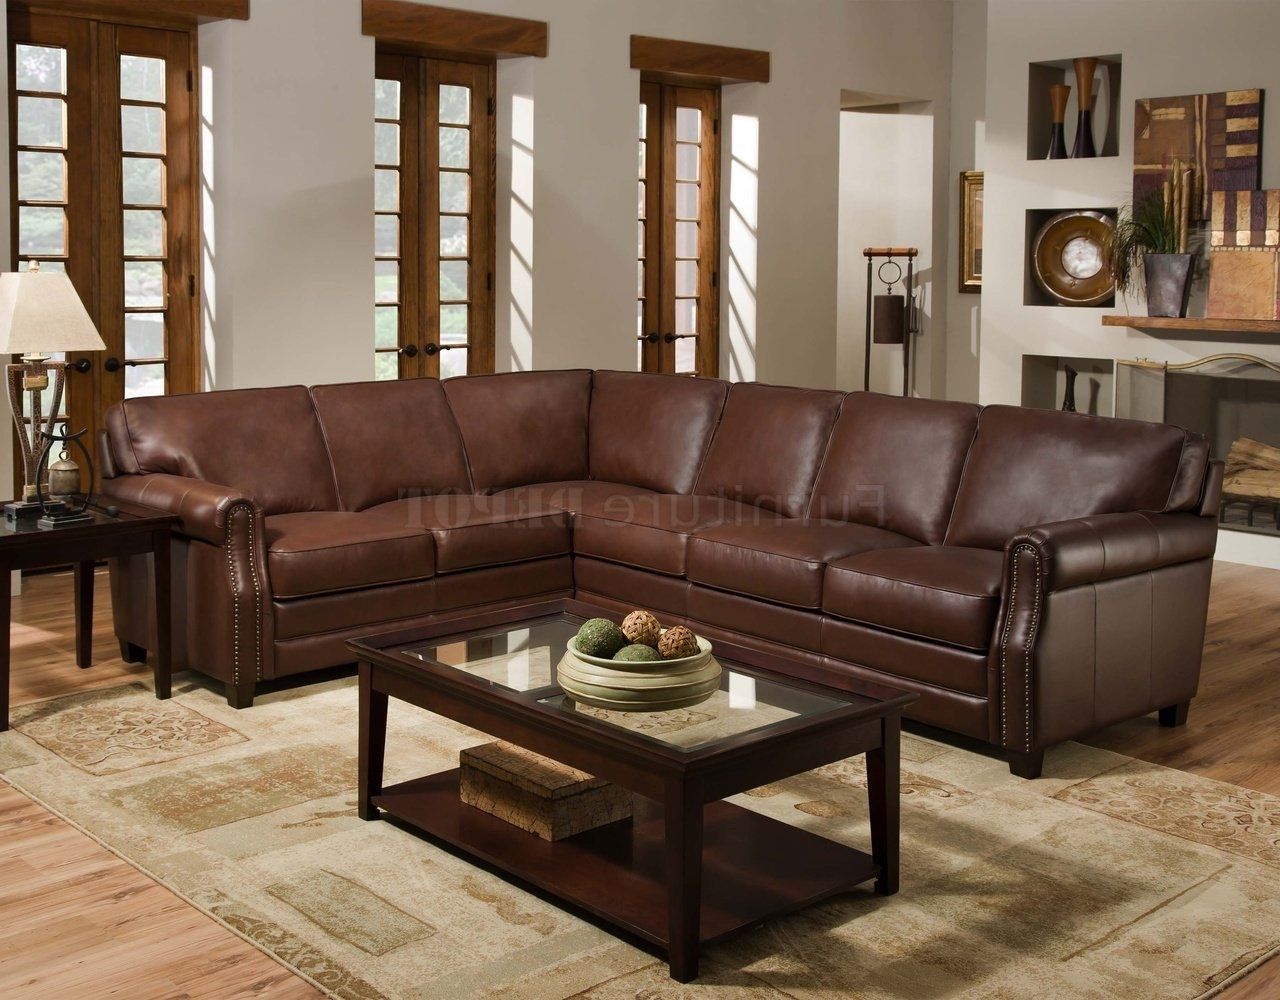 Best And Newest Furniture: Brown Leather Cheap Sectional Sofas Under 400 Plus Area Inside Sectional Sofas Under  (View 1 of 20)